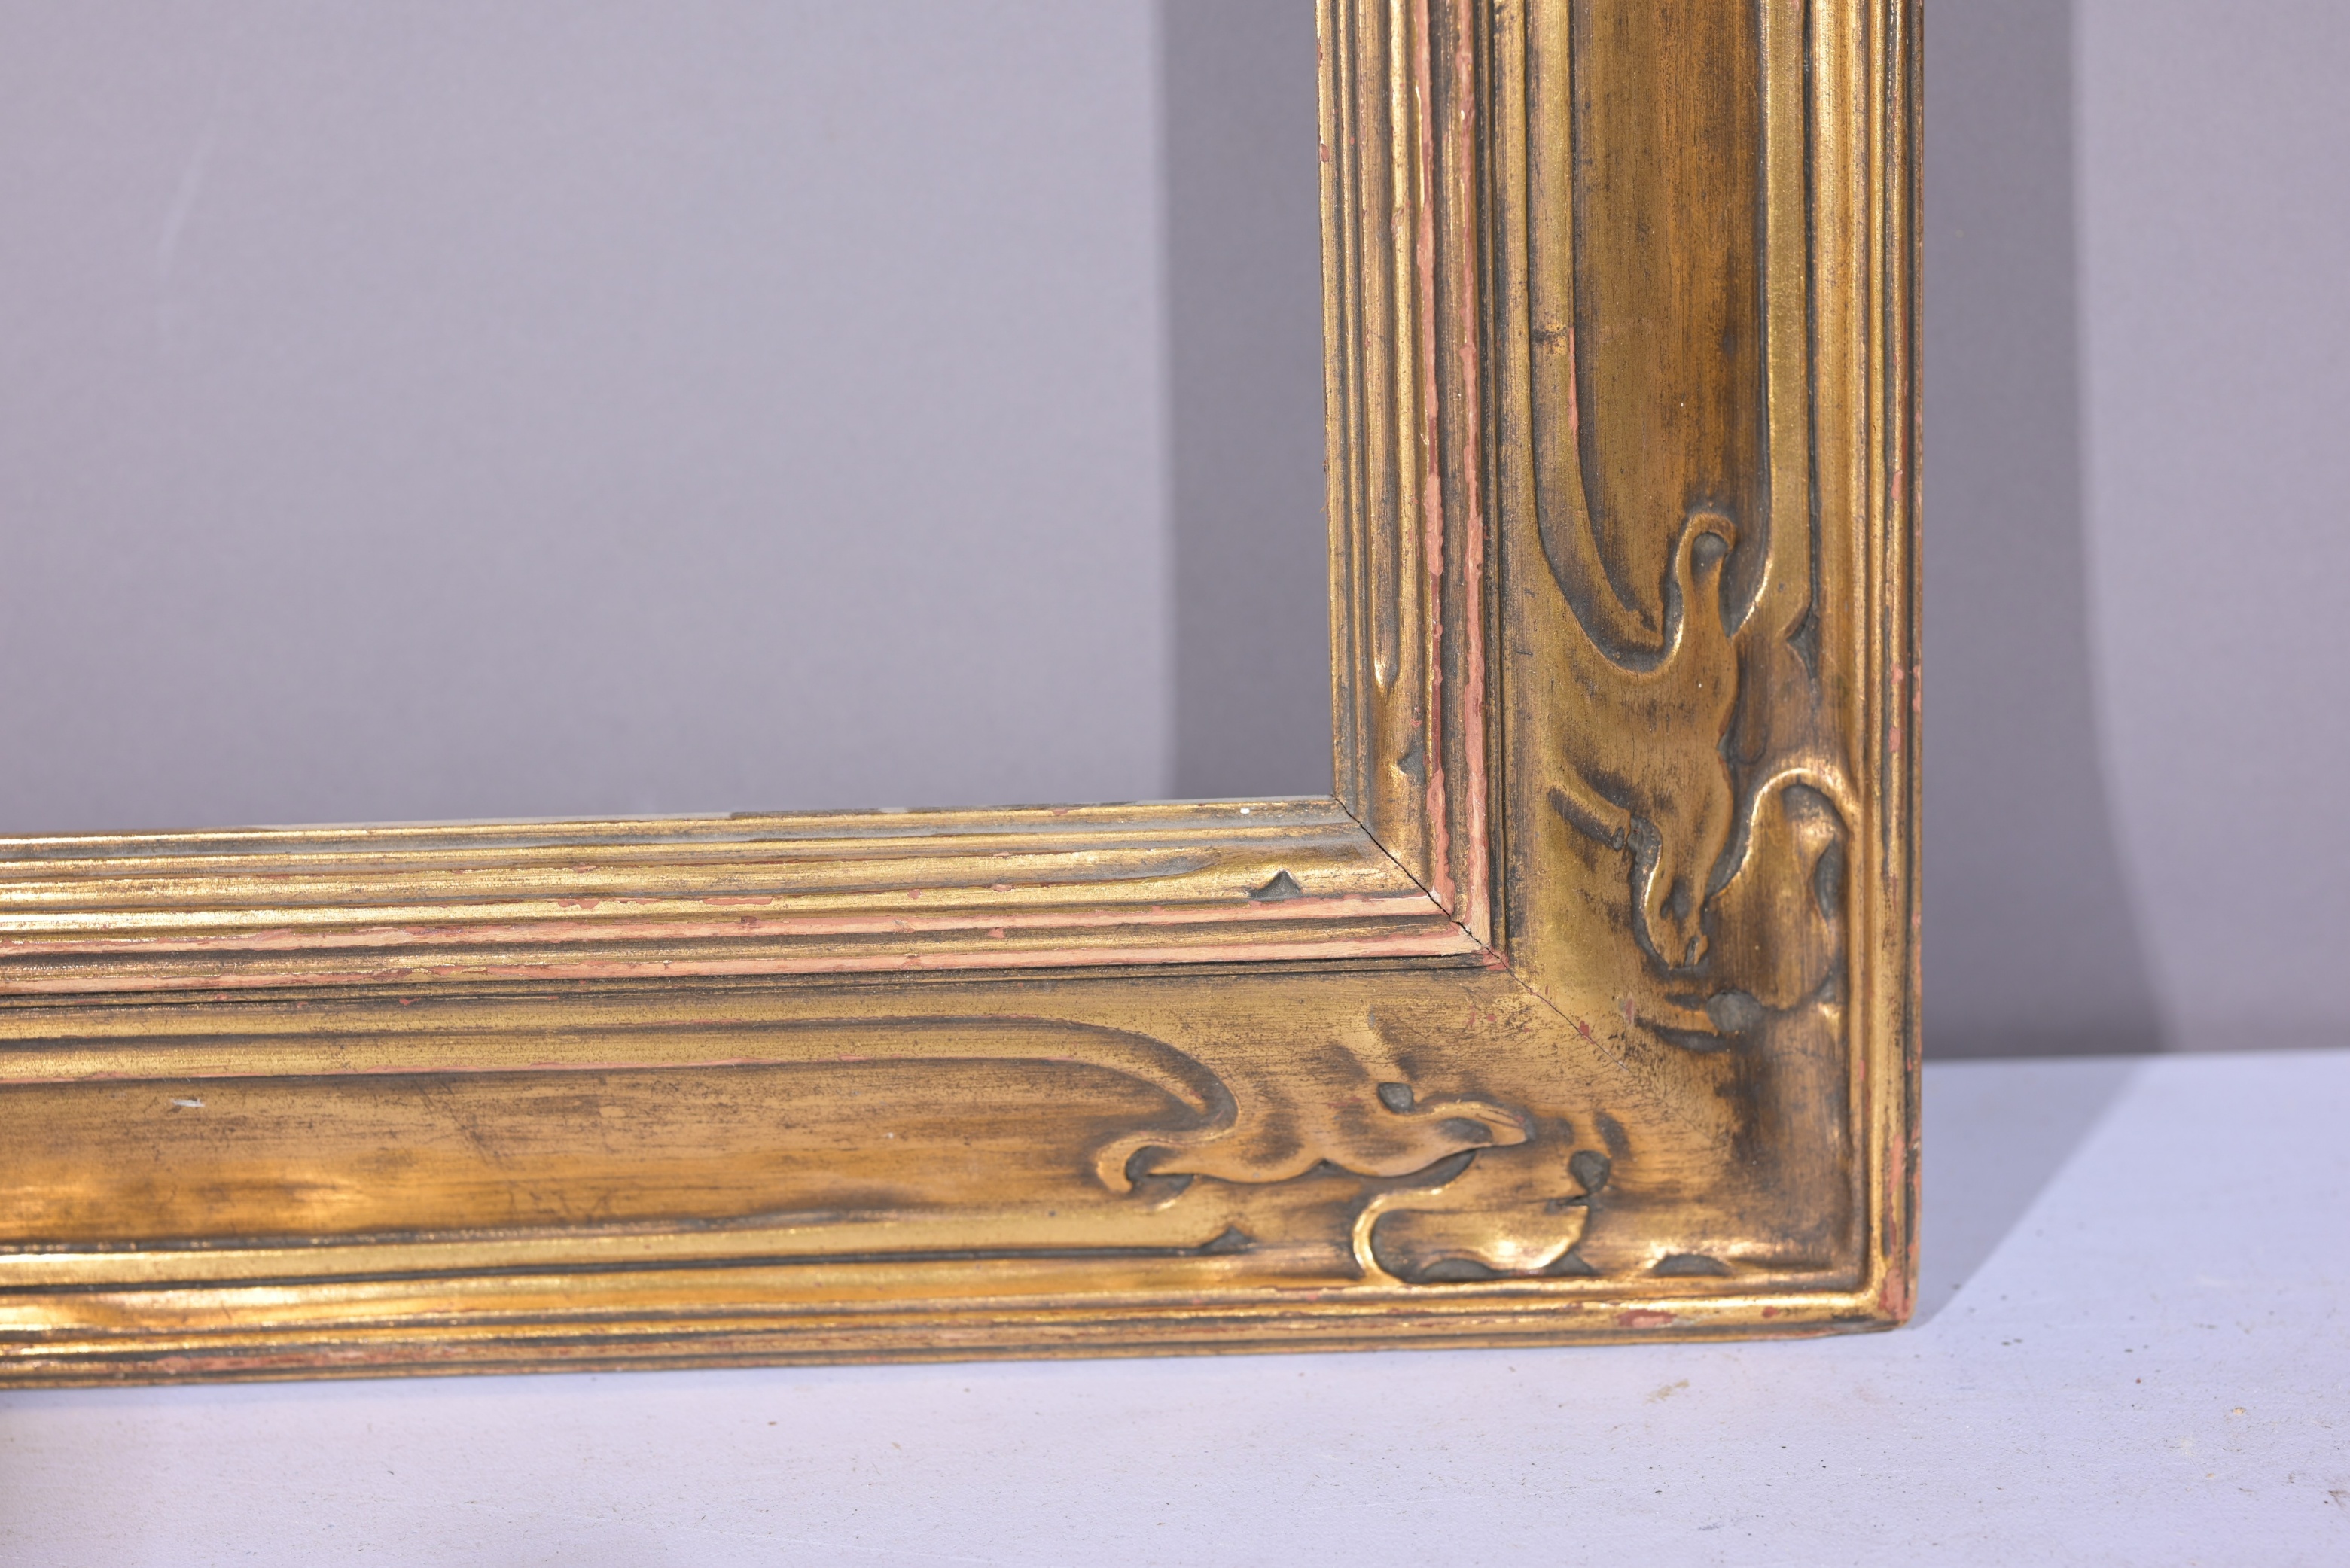 Exhibited 1910 Newcomb Macklin Frame- 21 x 17 - Image 5 of 11